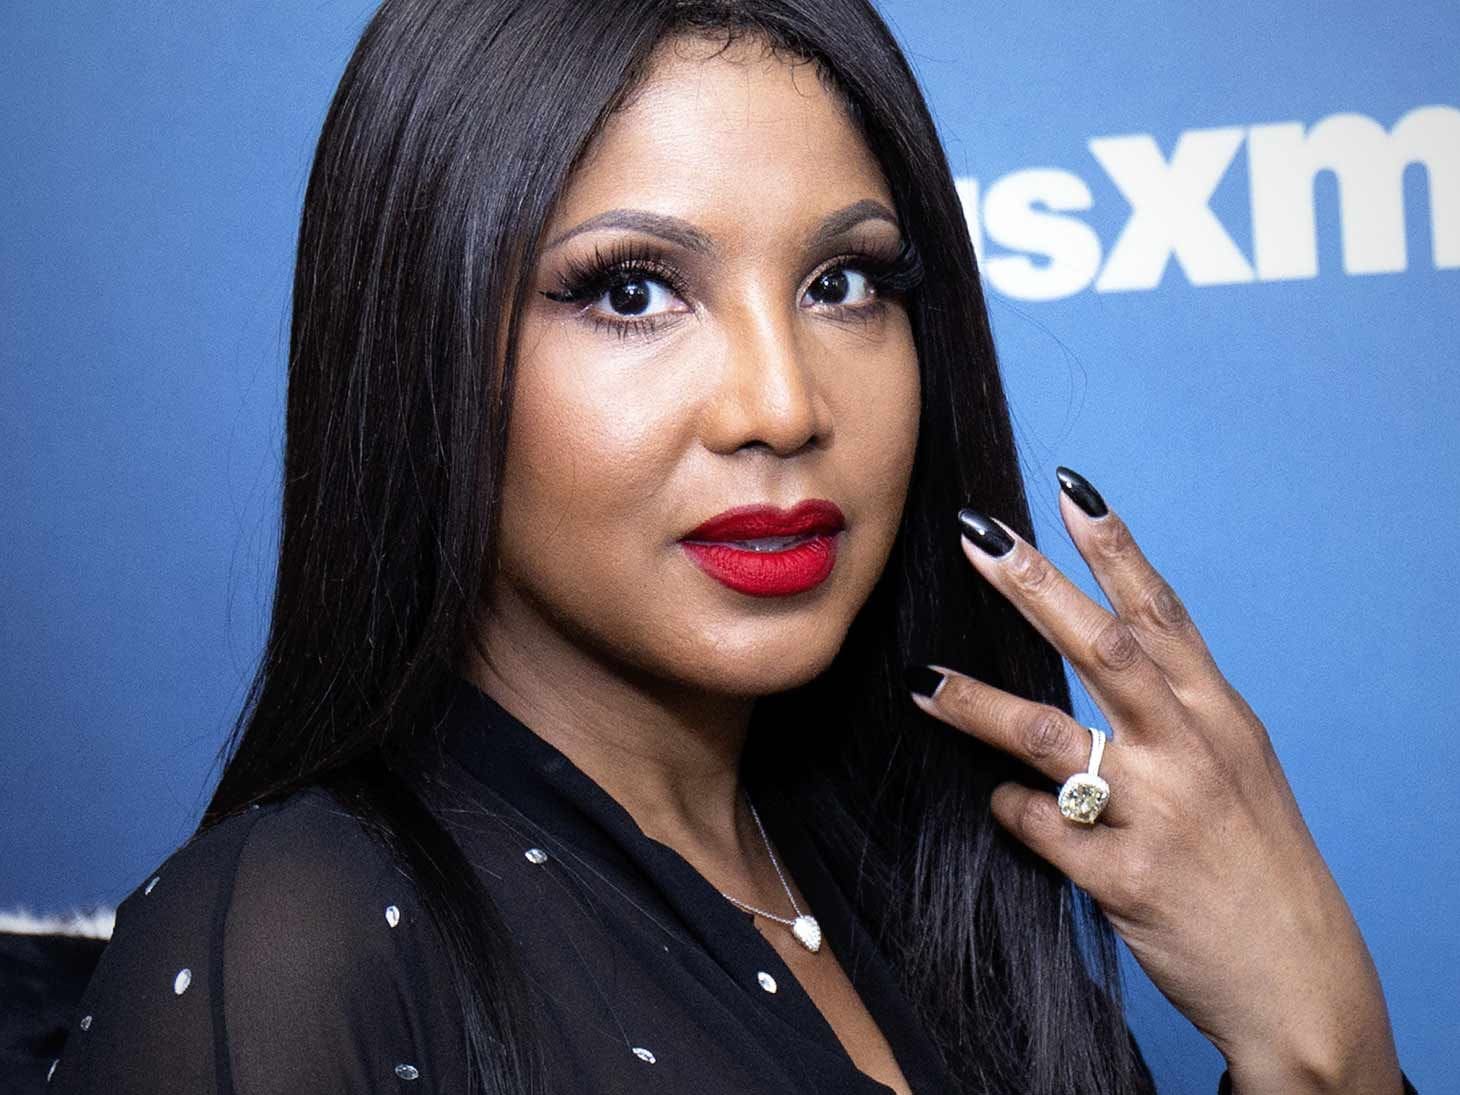 Toni Braxton Shares An Emotional Video In The Memory Of Kobe Bryant